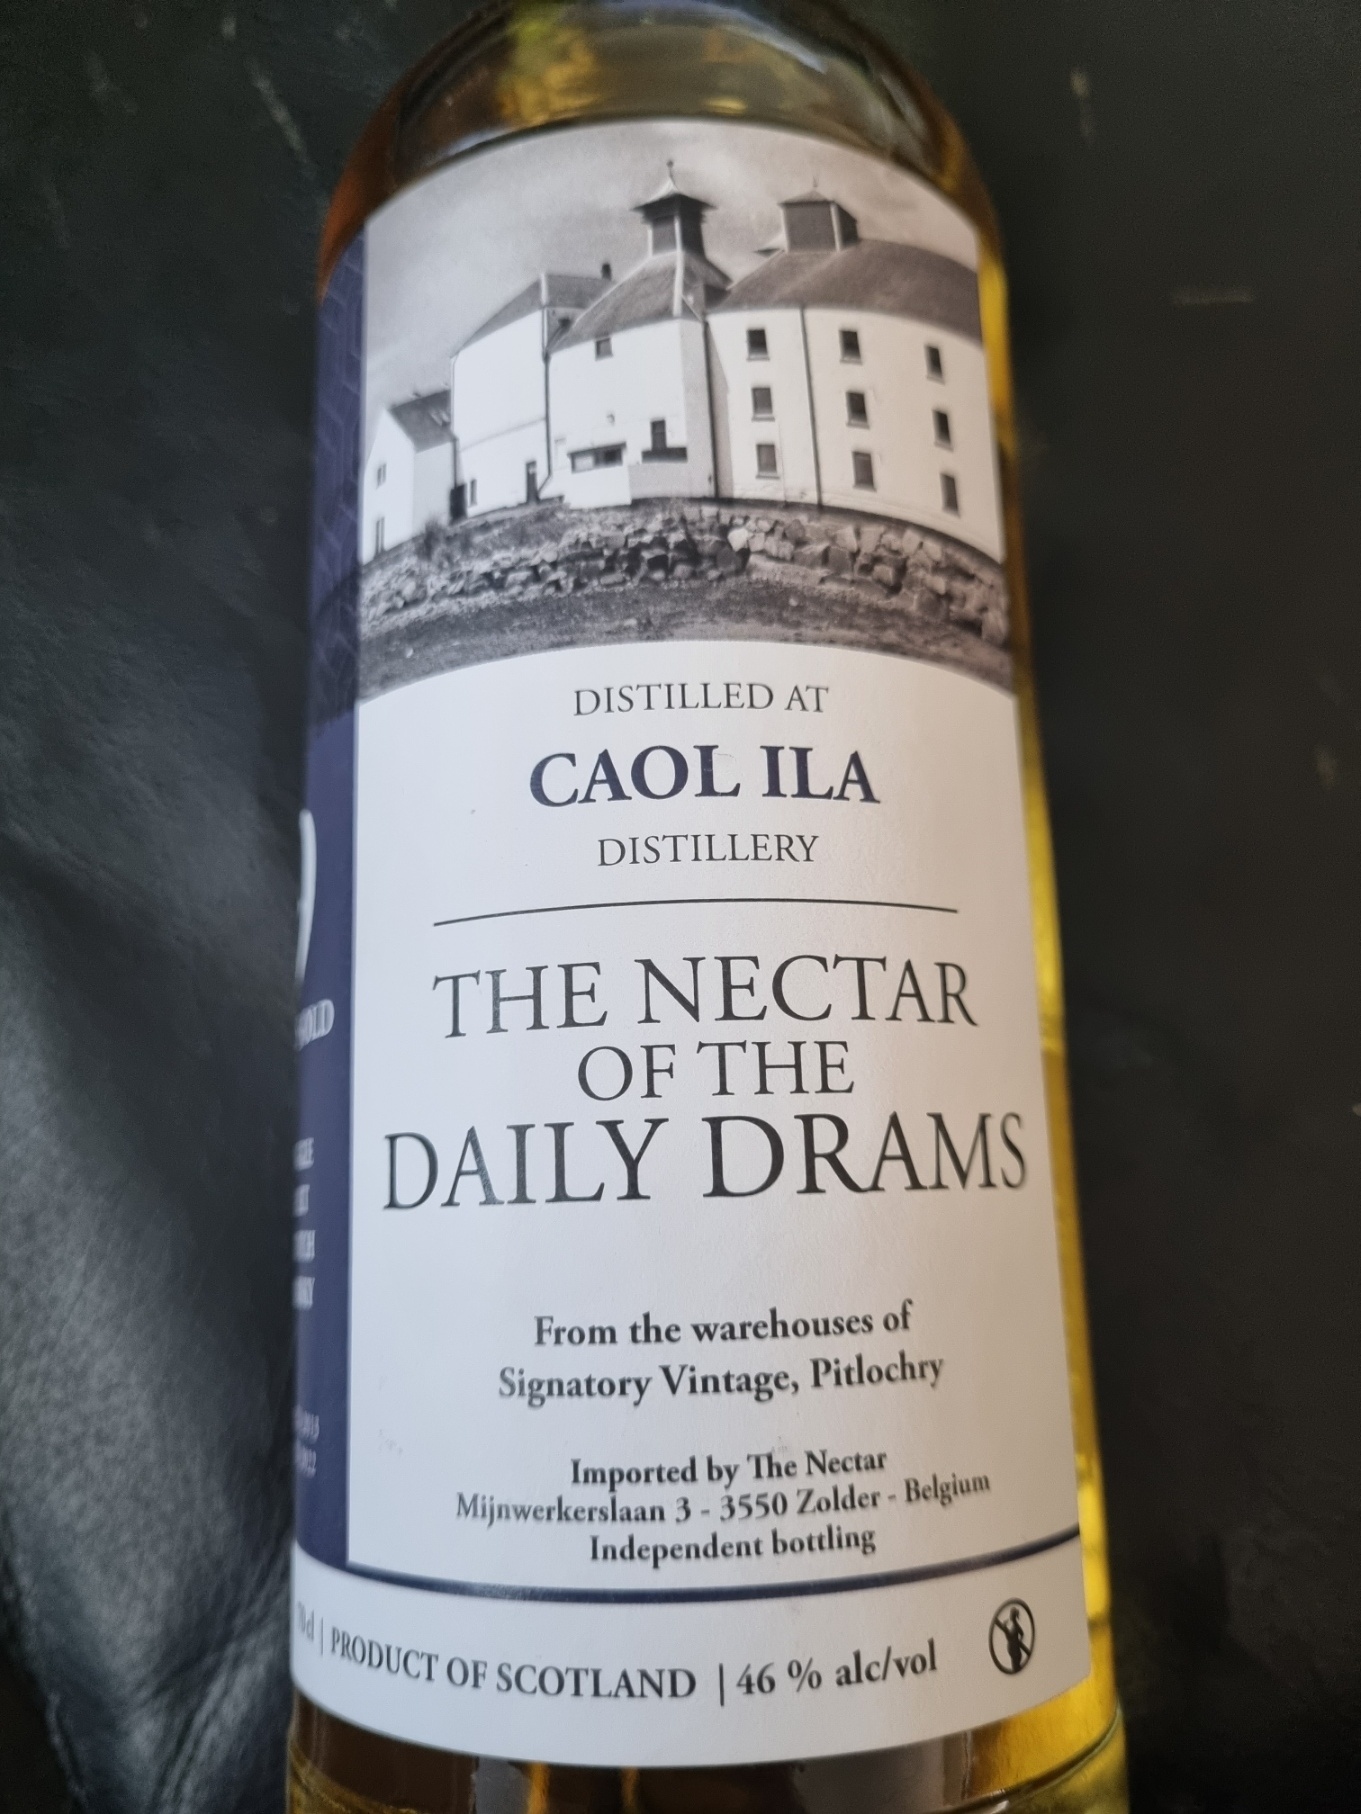 The Nectar OF The Daily Dram CAOL ILA 7Y 2013-2022 46% THE NECTAR OF THE DAILY DRAMS